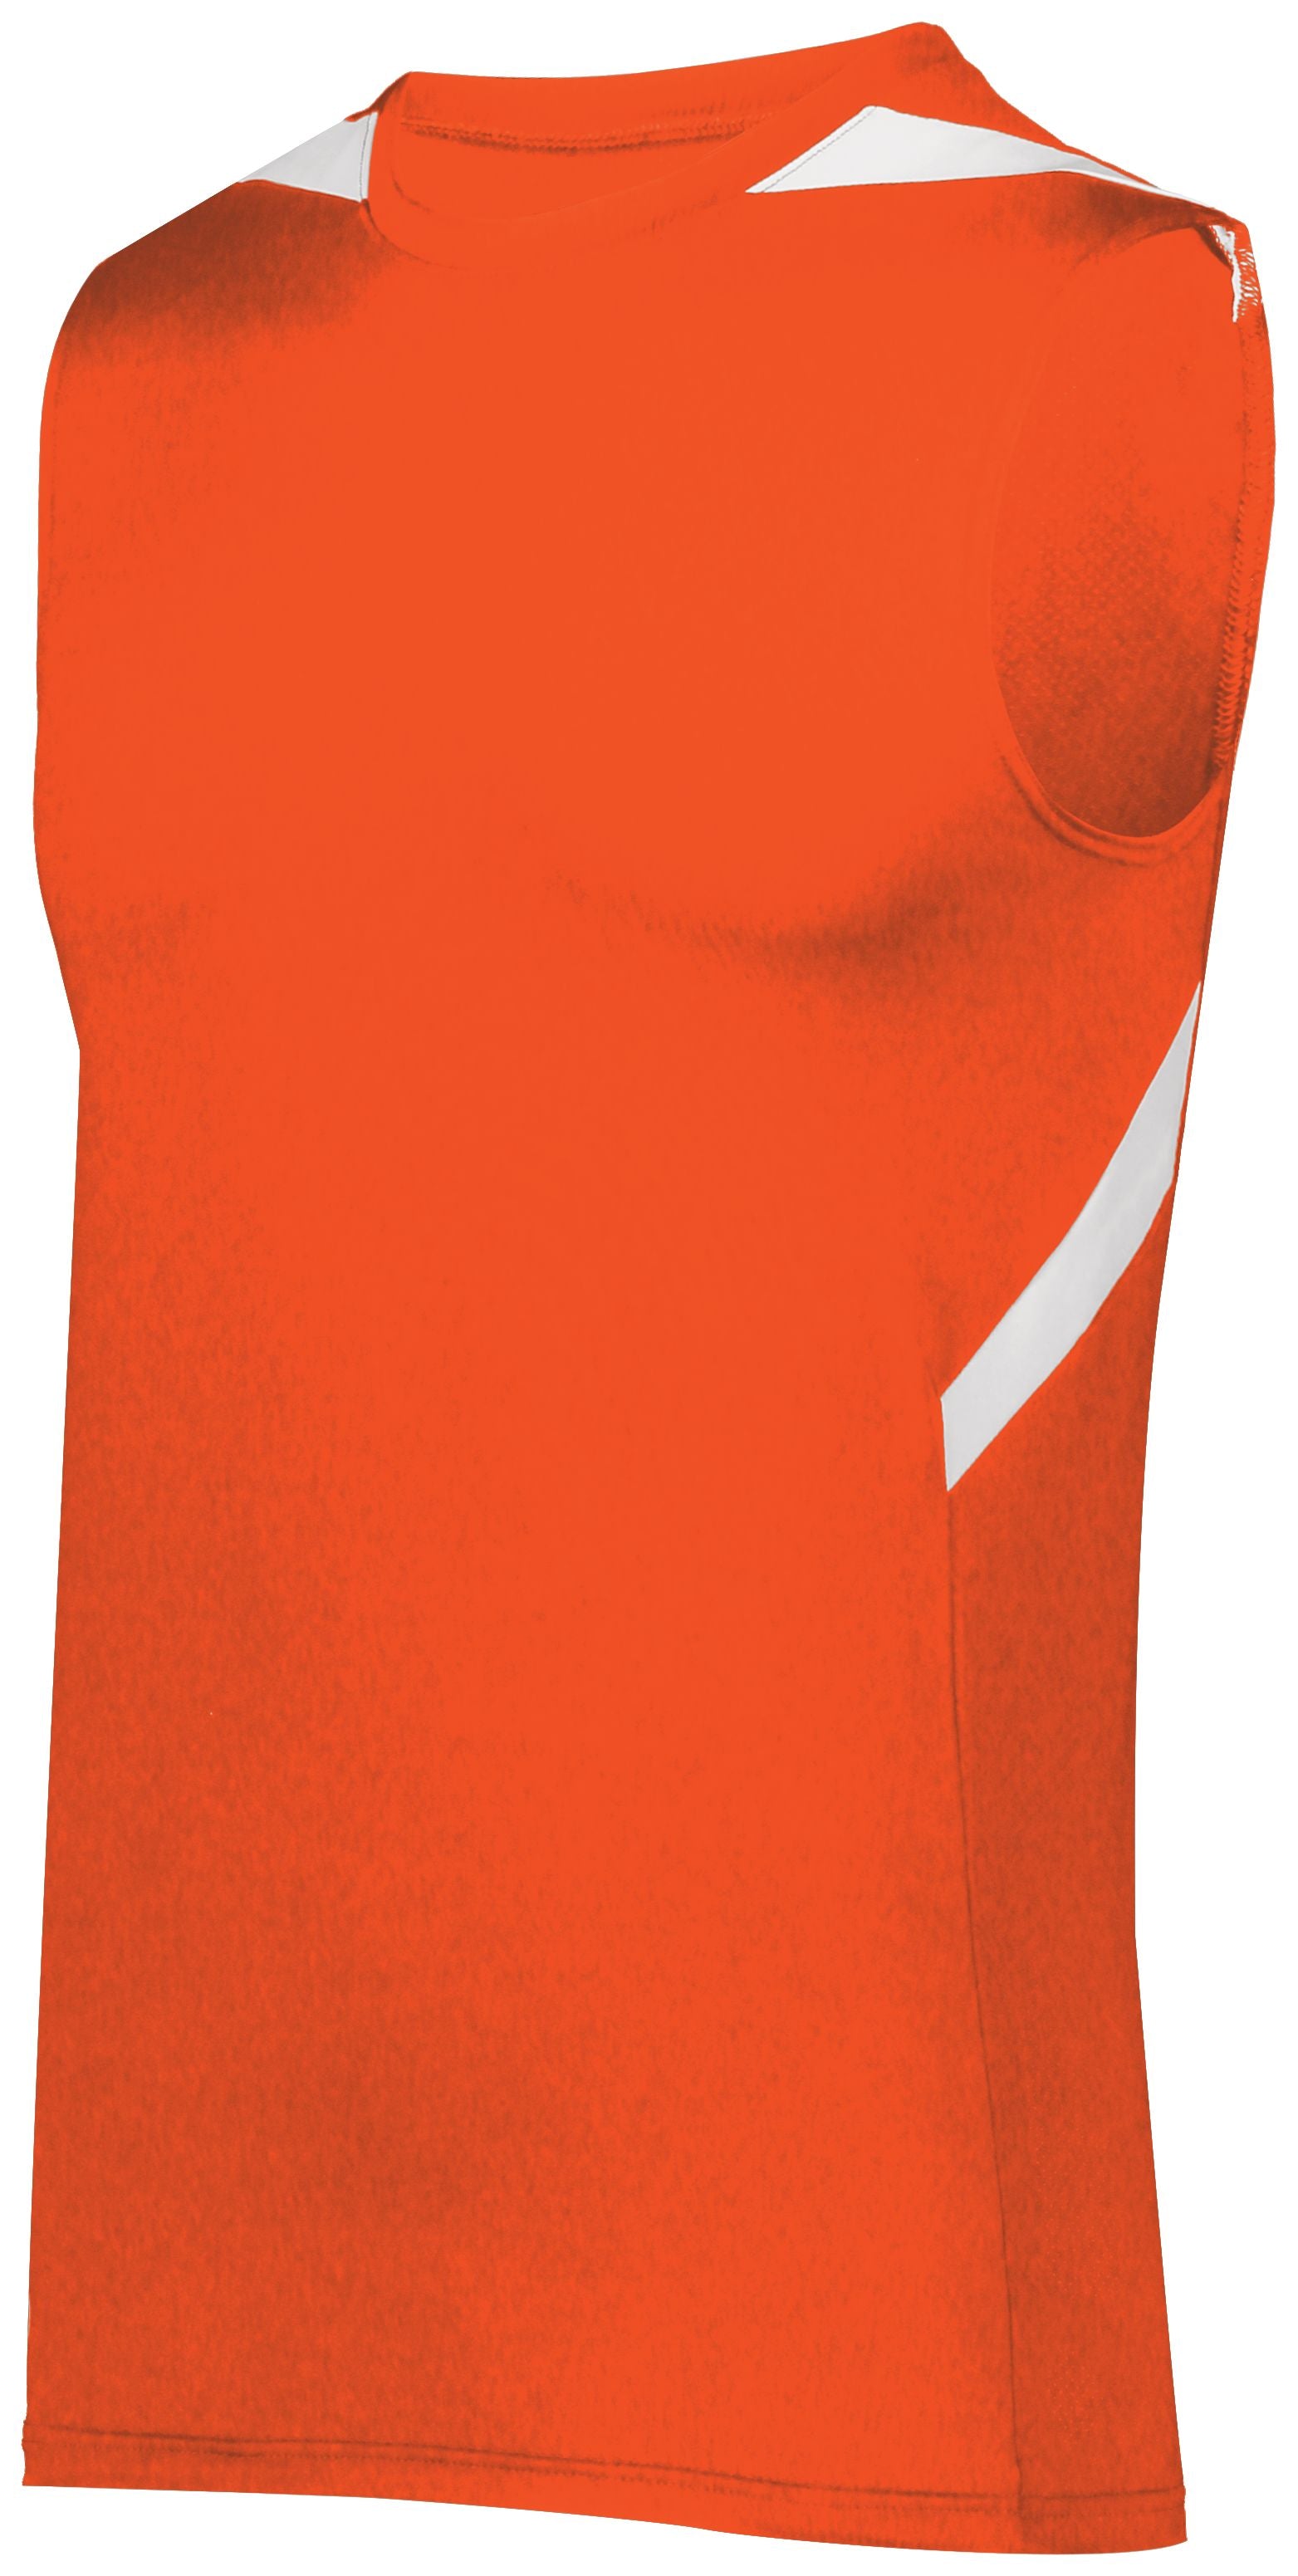 Holloway Pr Max Compression Jersey in Orange/White  -Part of the Adult, Adult-Jersey, Track-Field, Holloway, Shirts product lines at KanaleyCreations.com